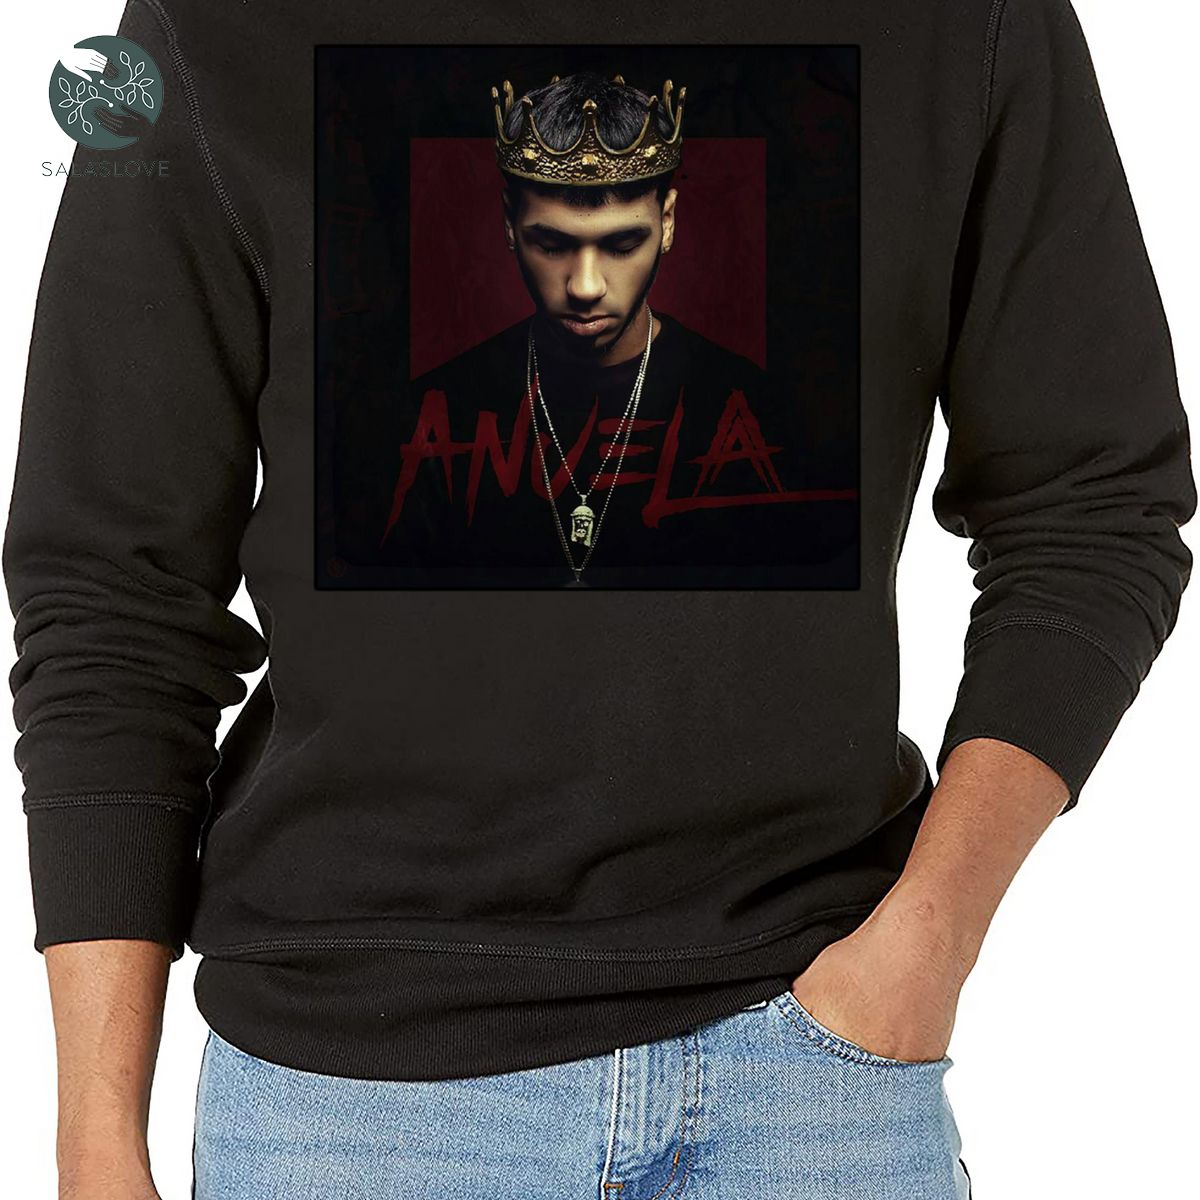 ANUEL AA Vintage Style T-shirt